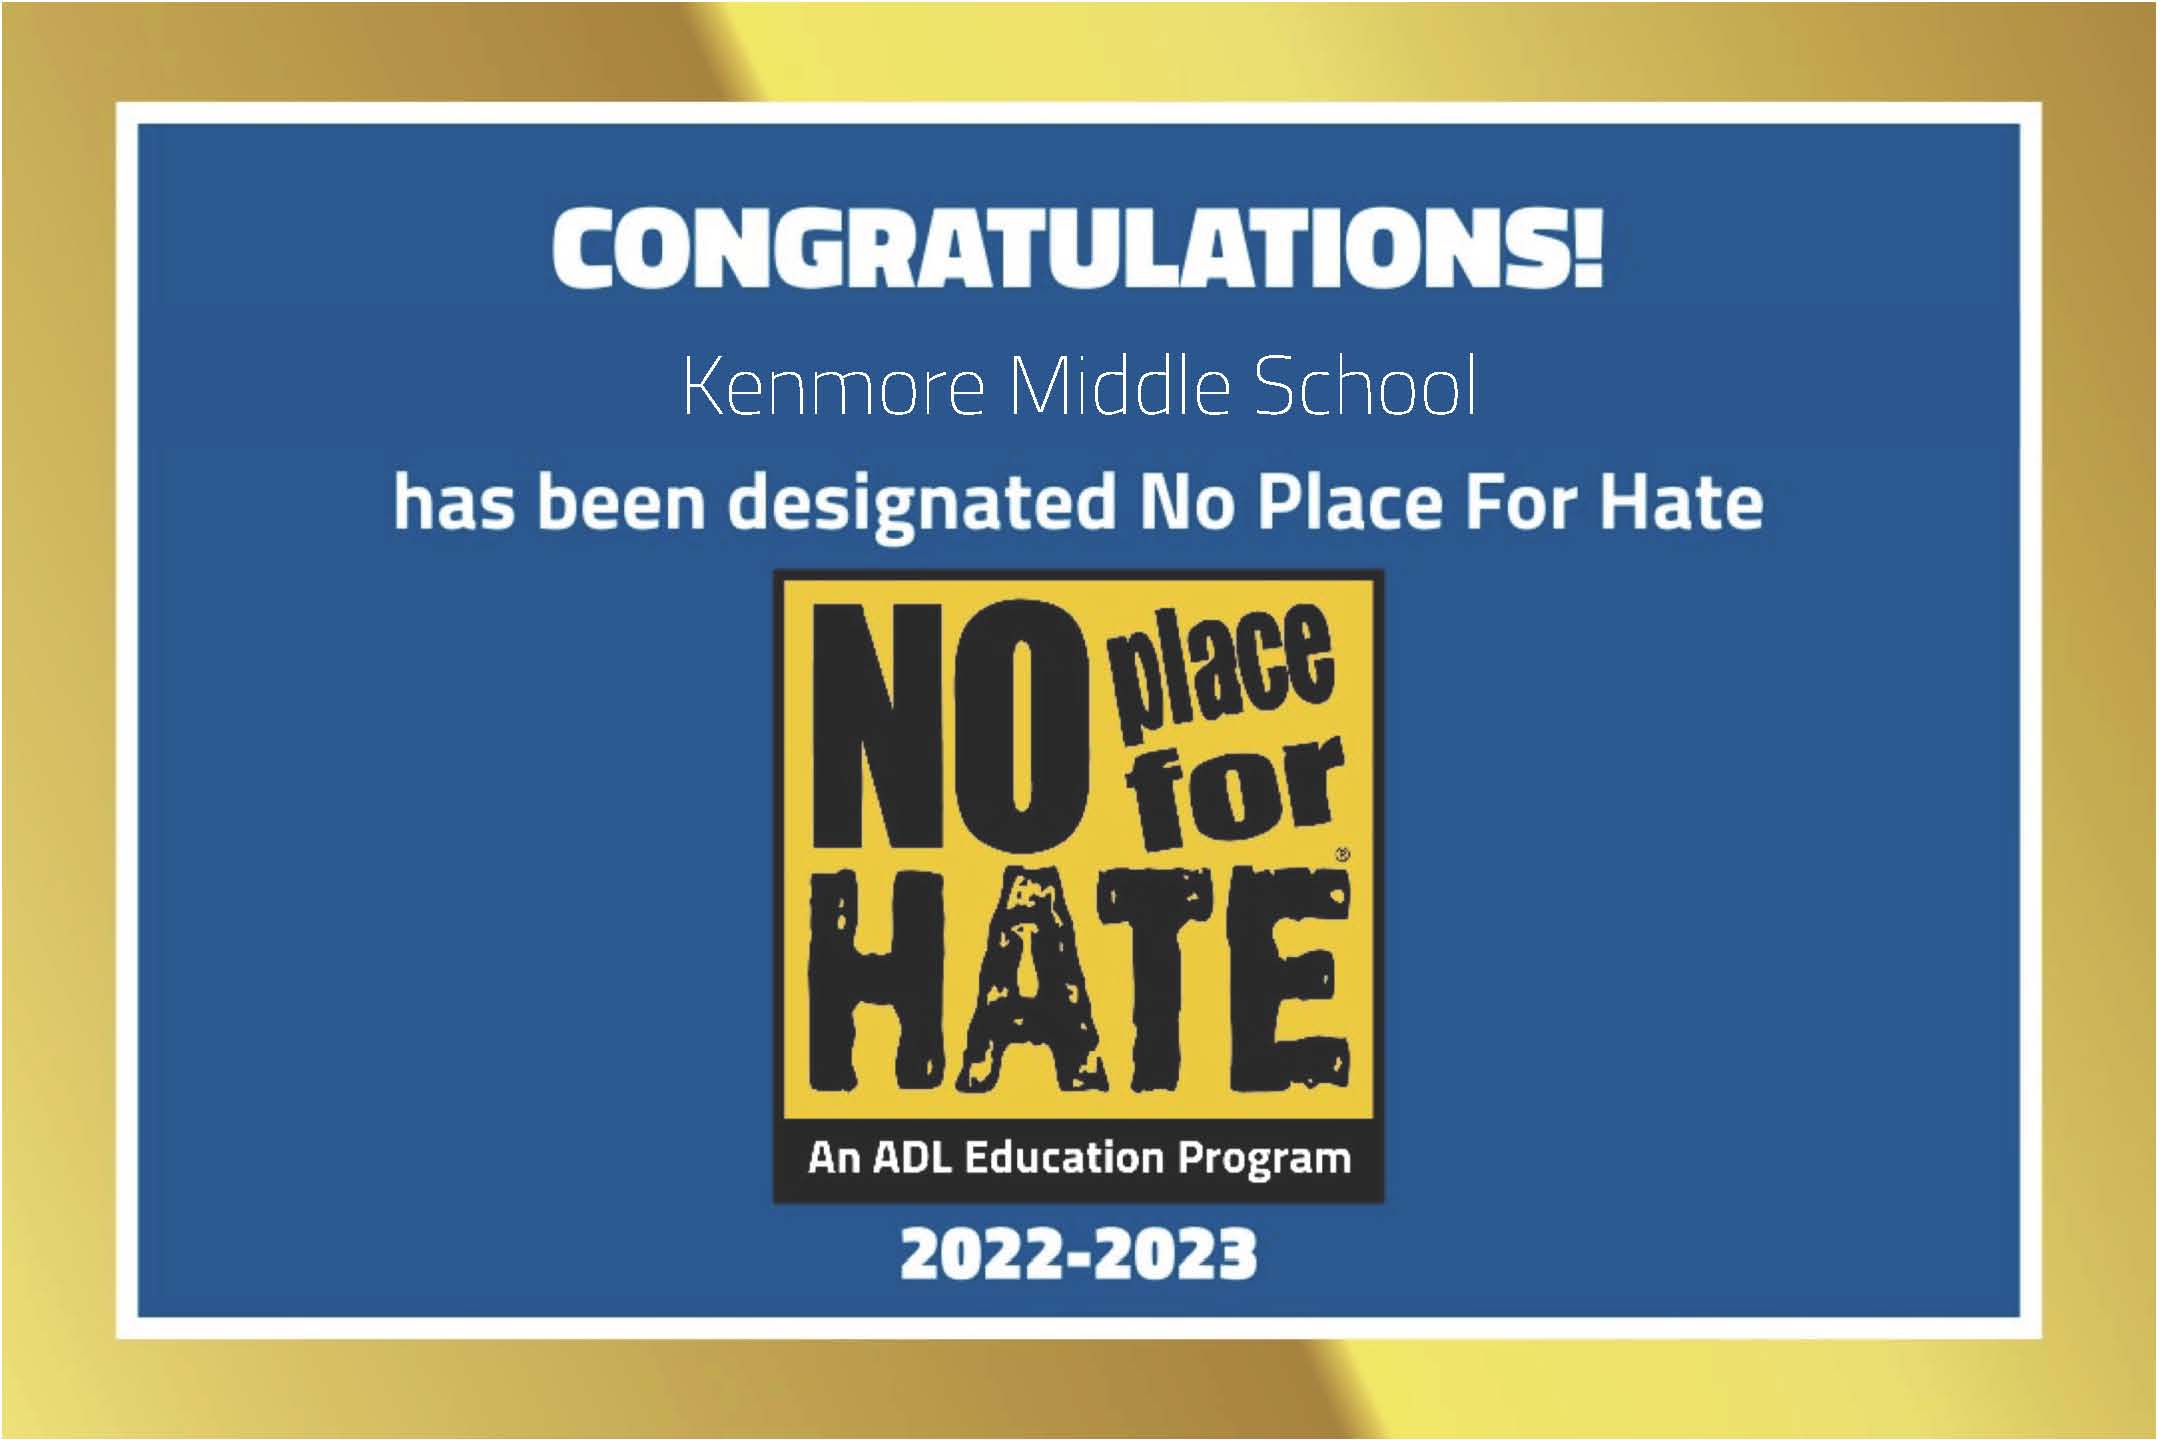 Kenmore has been designated as a No Place for Hate school for the 2022-2023 school year!